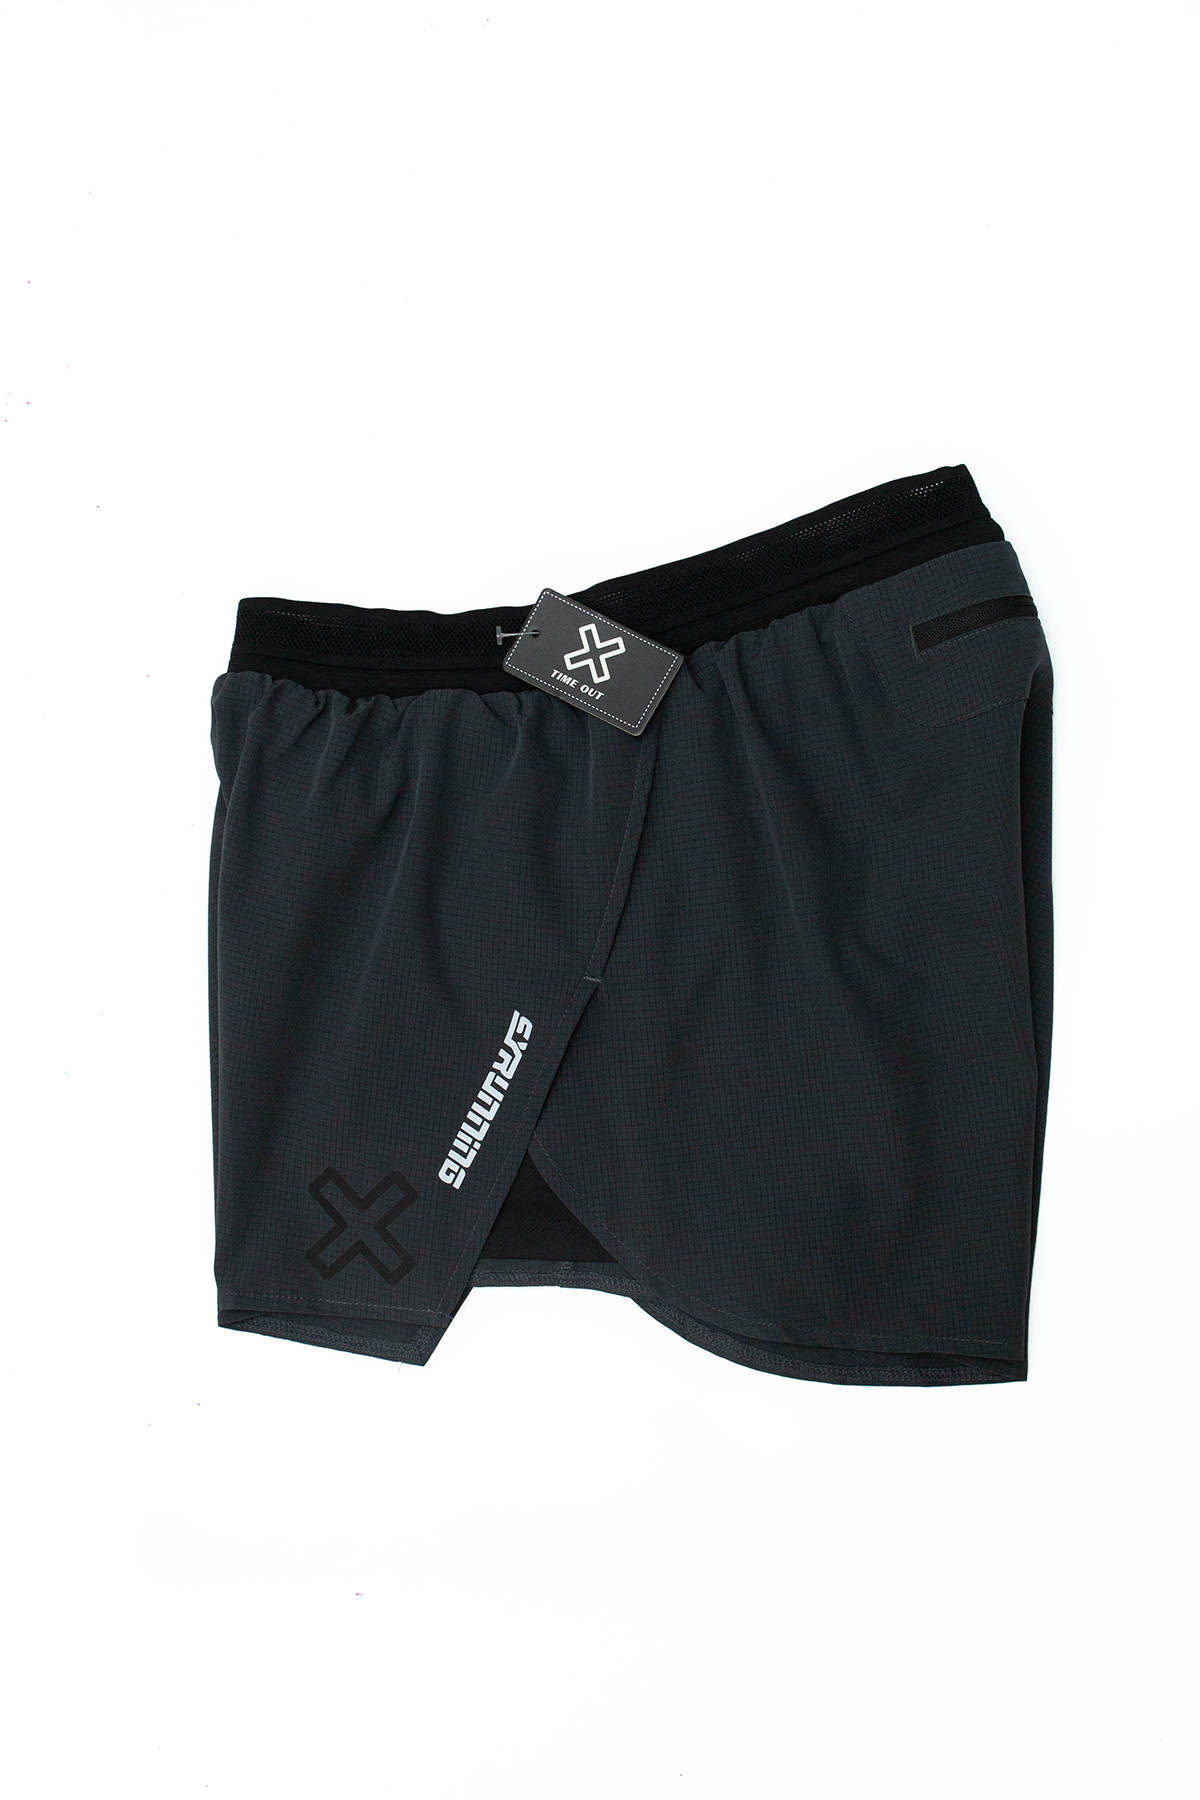 Time-Out-X-Sprinter-Running-Shorts—Graphite-Grey—Side